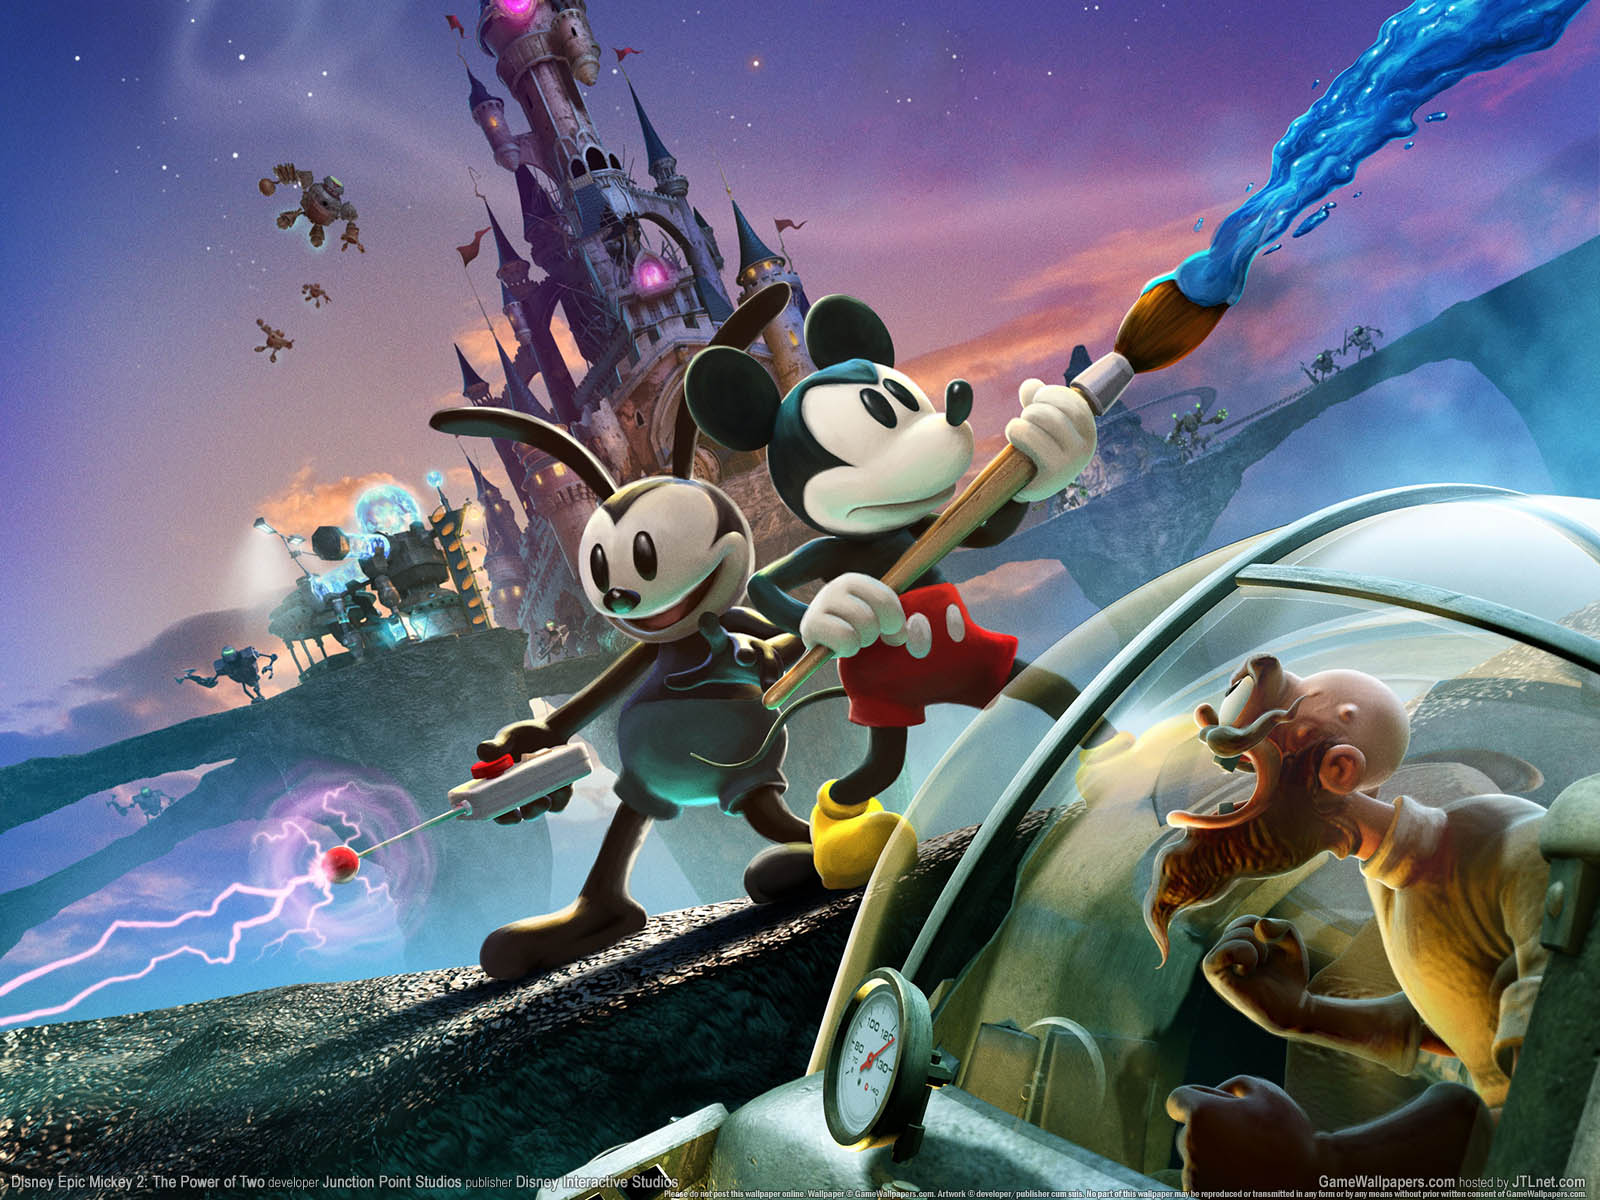 Disney Epic Mickey 2%253A The Power of Two fond d'cran 01 1600x1200